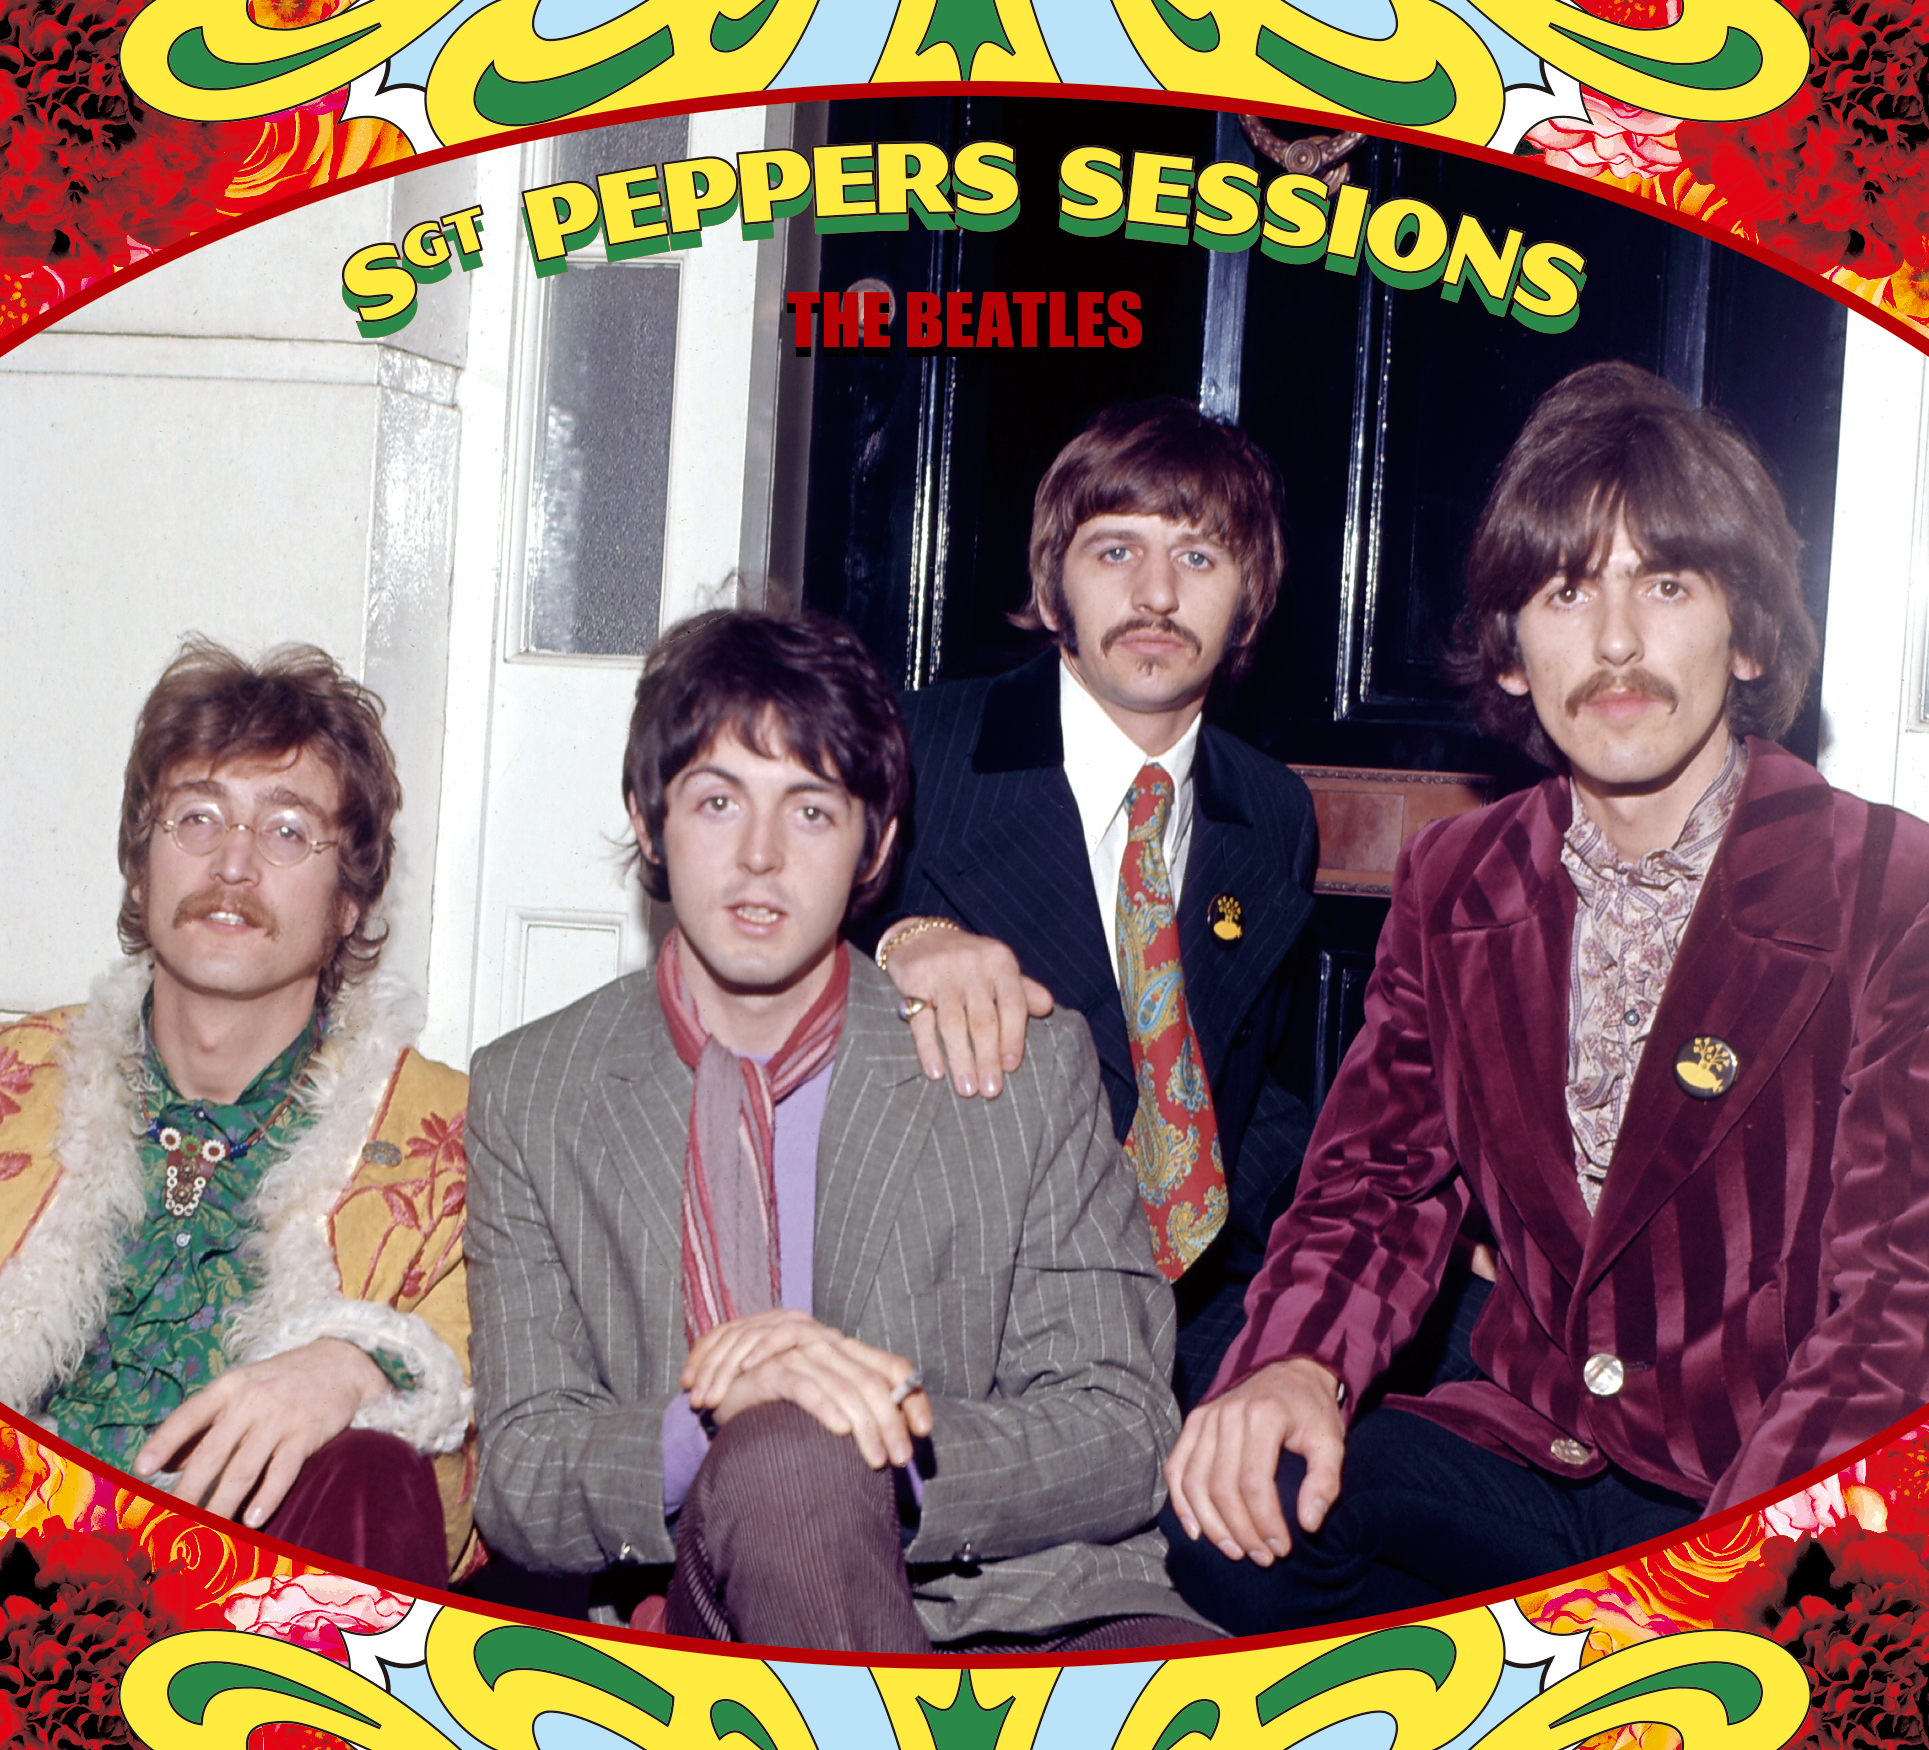 THE BEATLES / SGT. Peppers Sessions